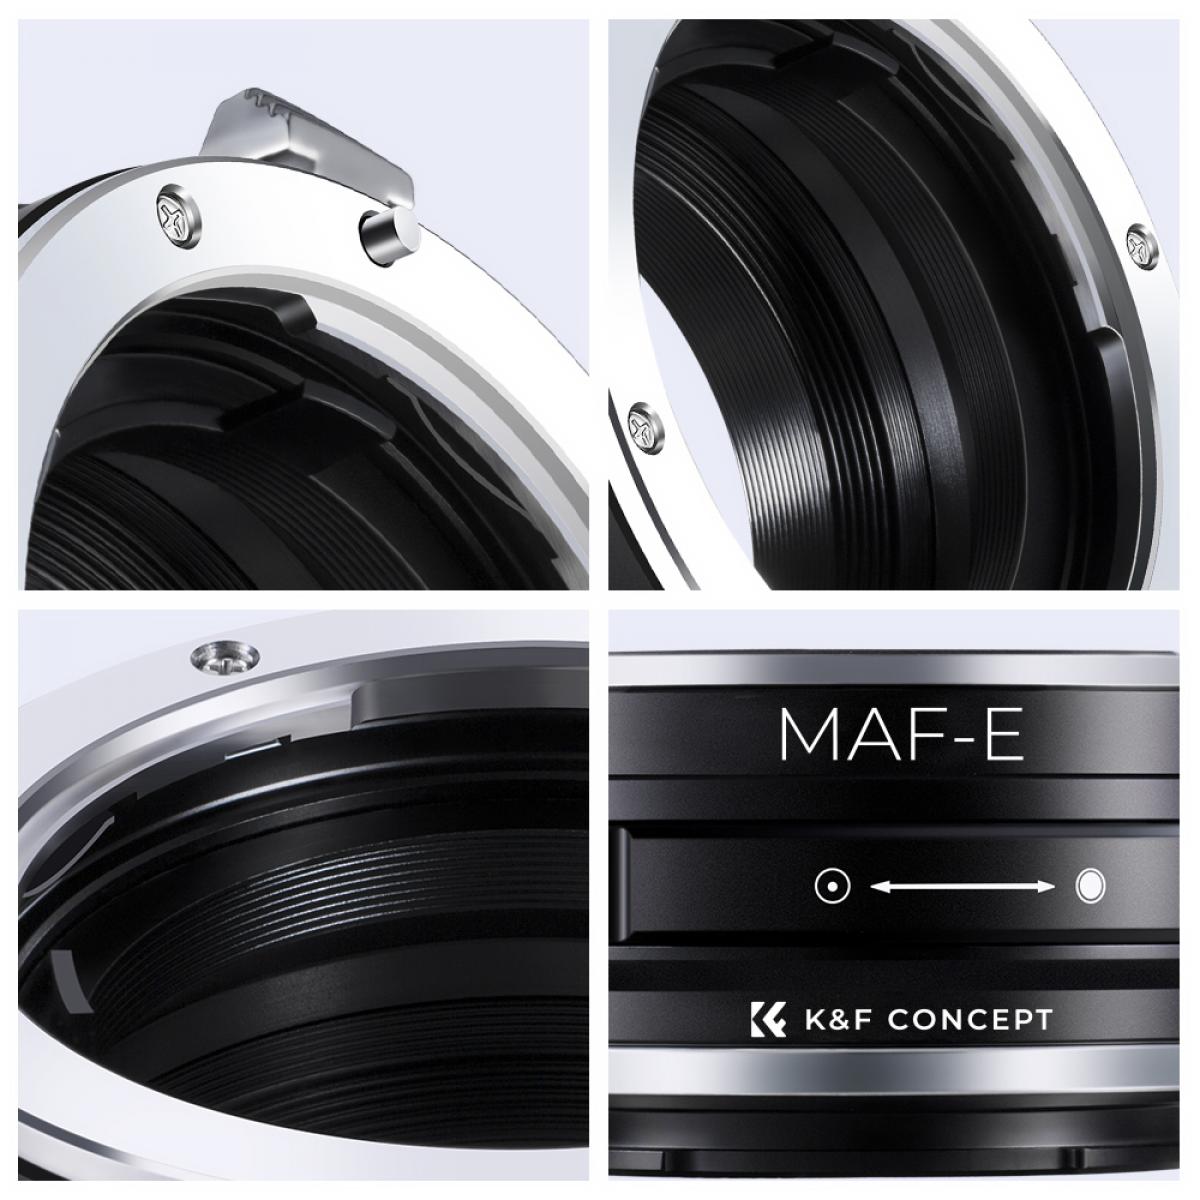 Sony A Mount Lenses to Sony E Mount Camera Adapter